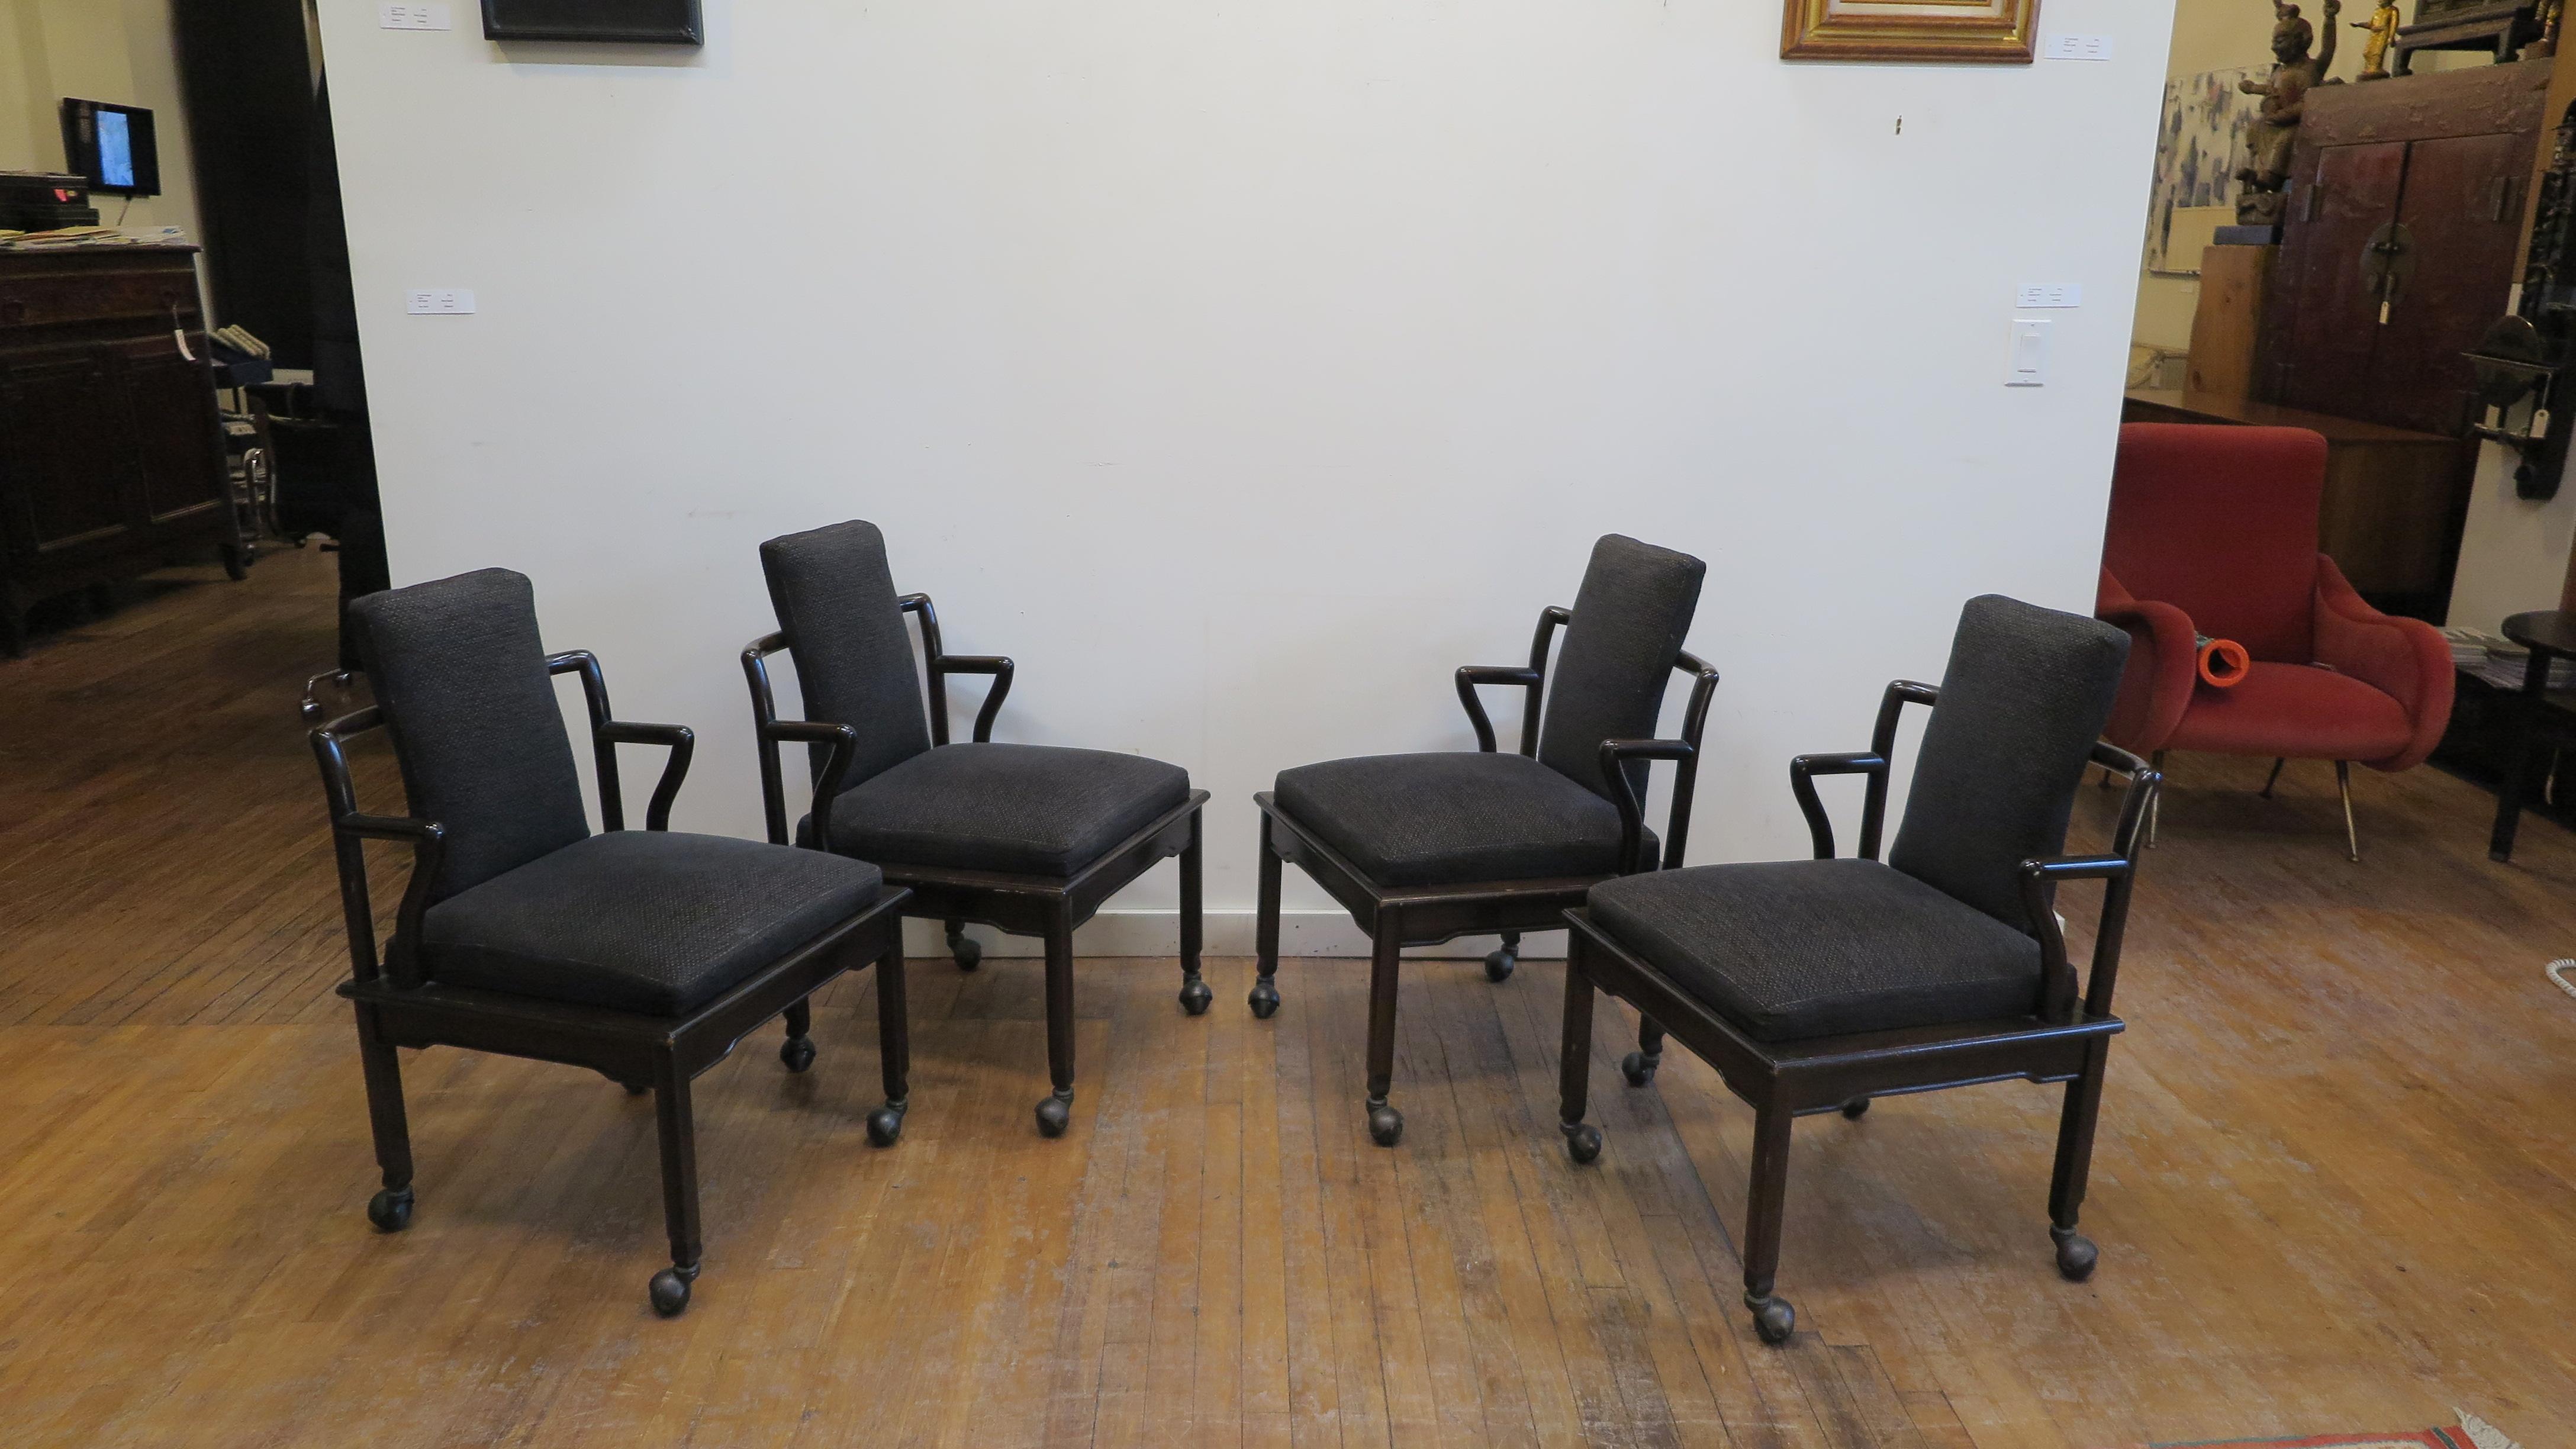 John Widdicomb Asian inspired chairs. Vintage Mid-Century Modern chairs by John Widdicomb. Chinese-inspired solid walnut wood chairs, set of four, squared form with shortened arms and narrow back rest. Seat and back rest upholstered on casters. Very